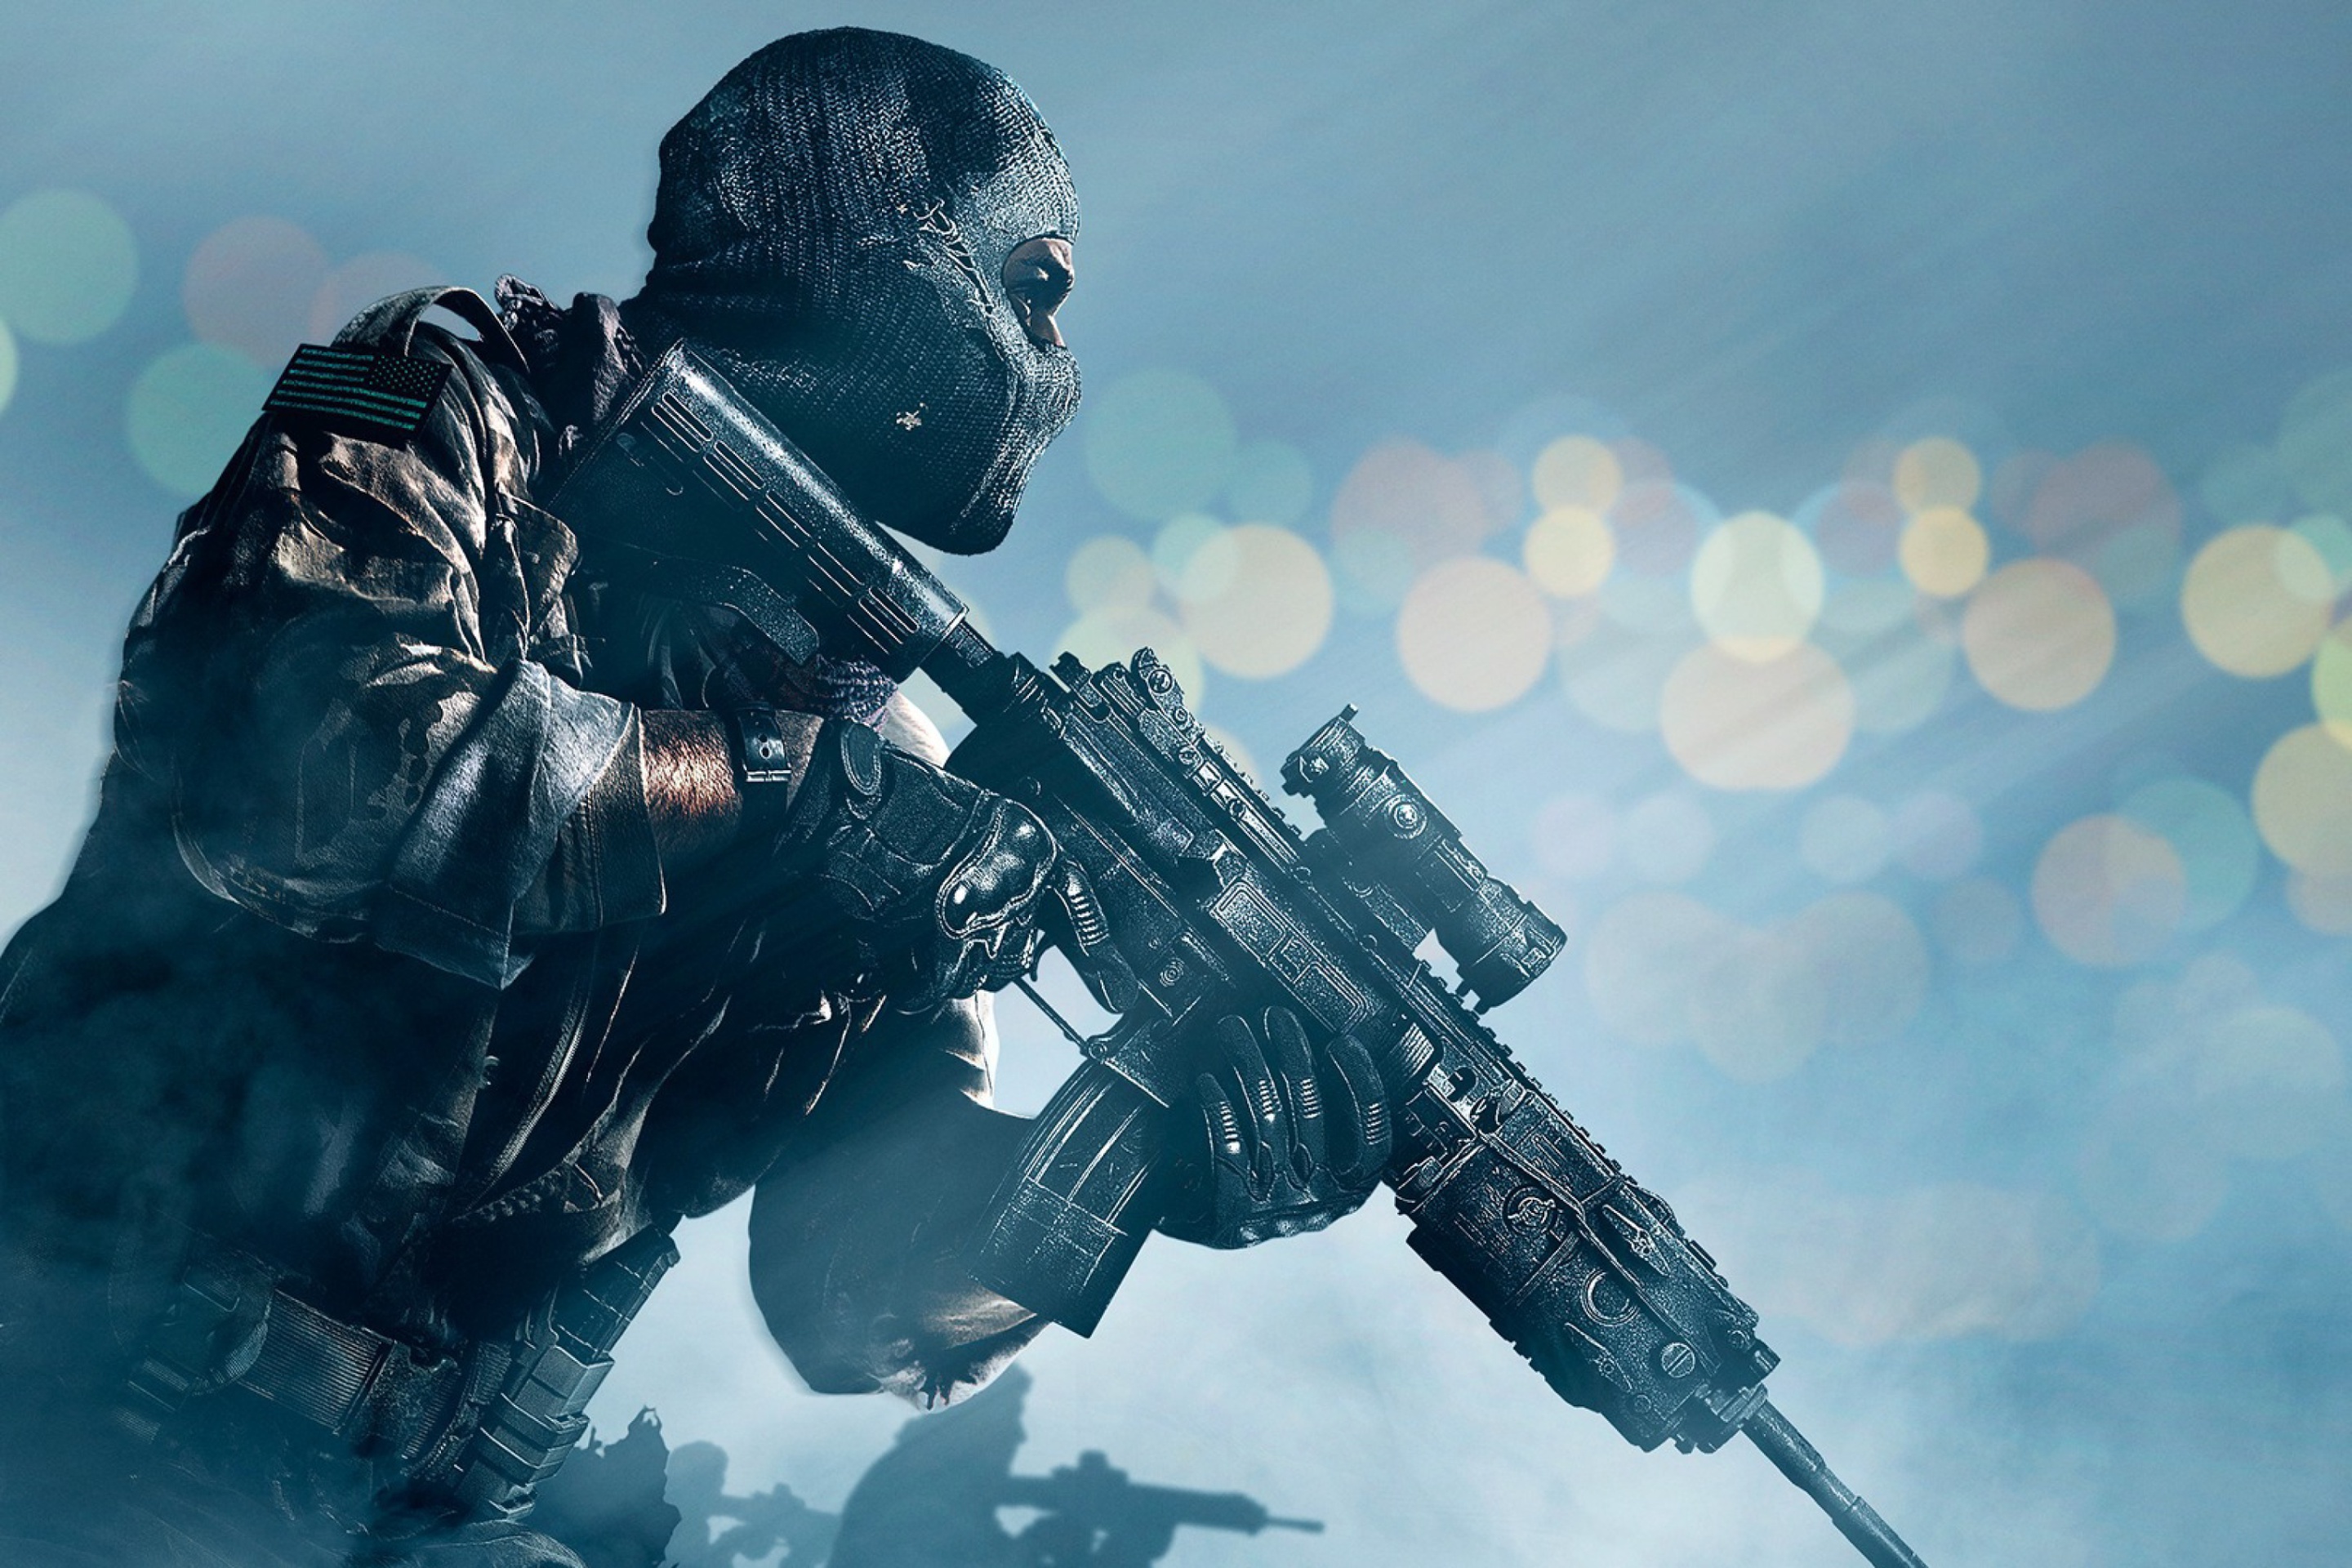 Soldier Call of Duty Ghosts wallpaper 2880x1920